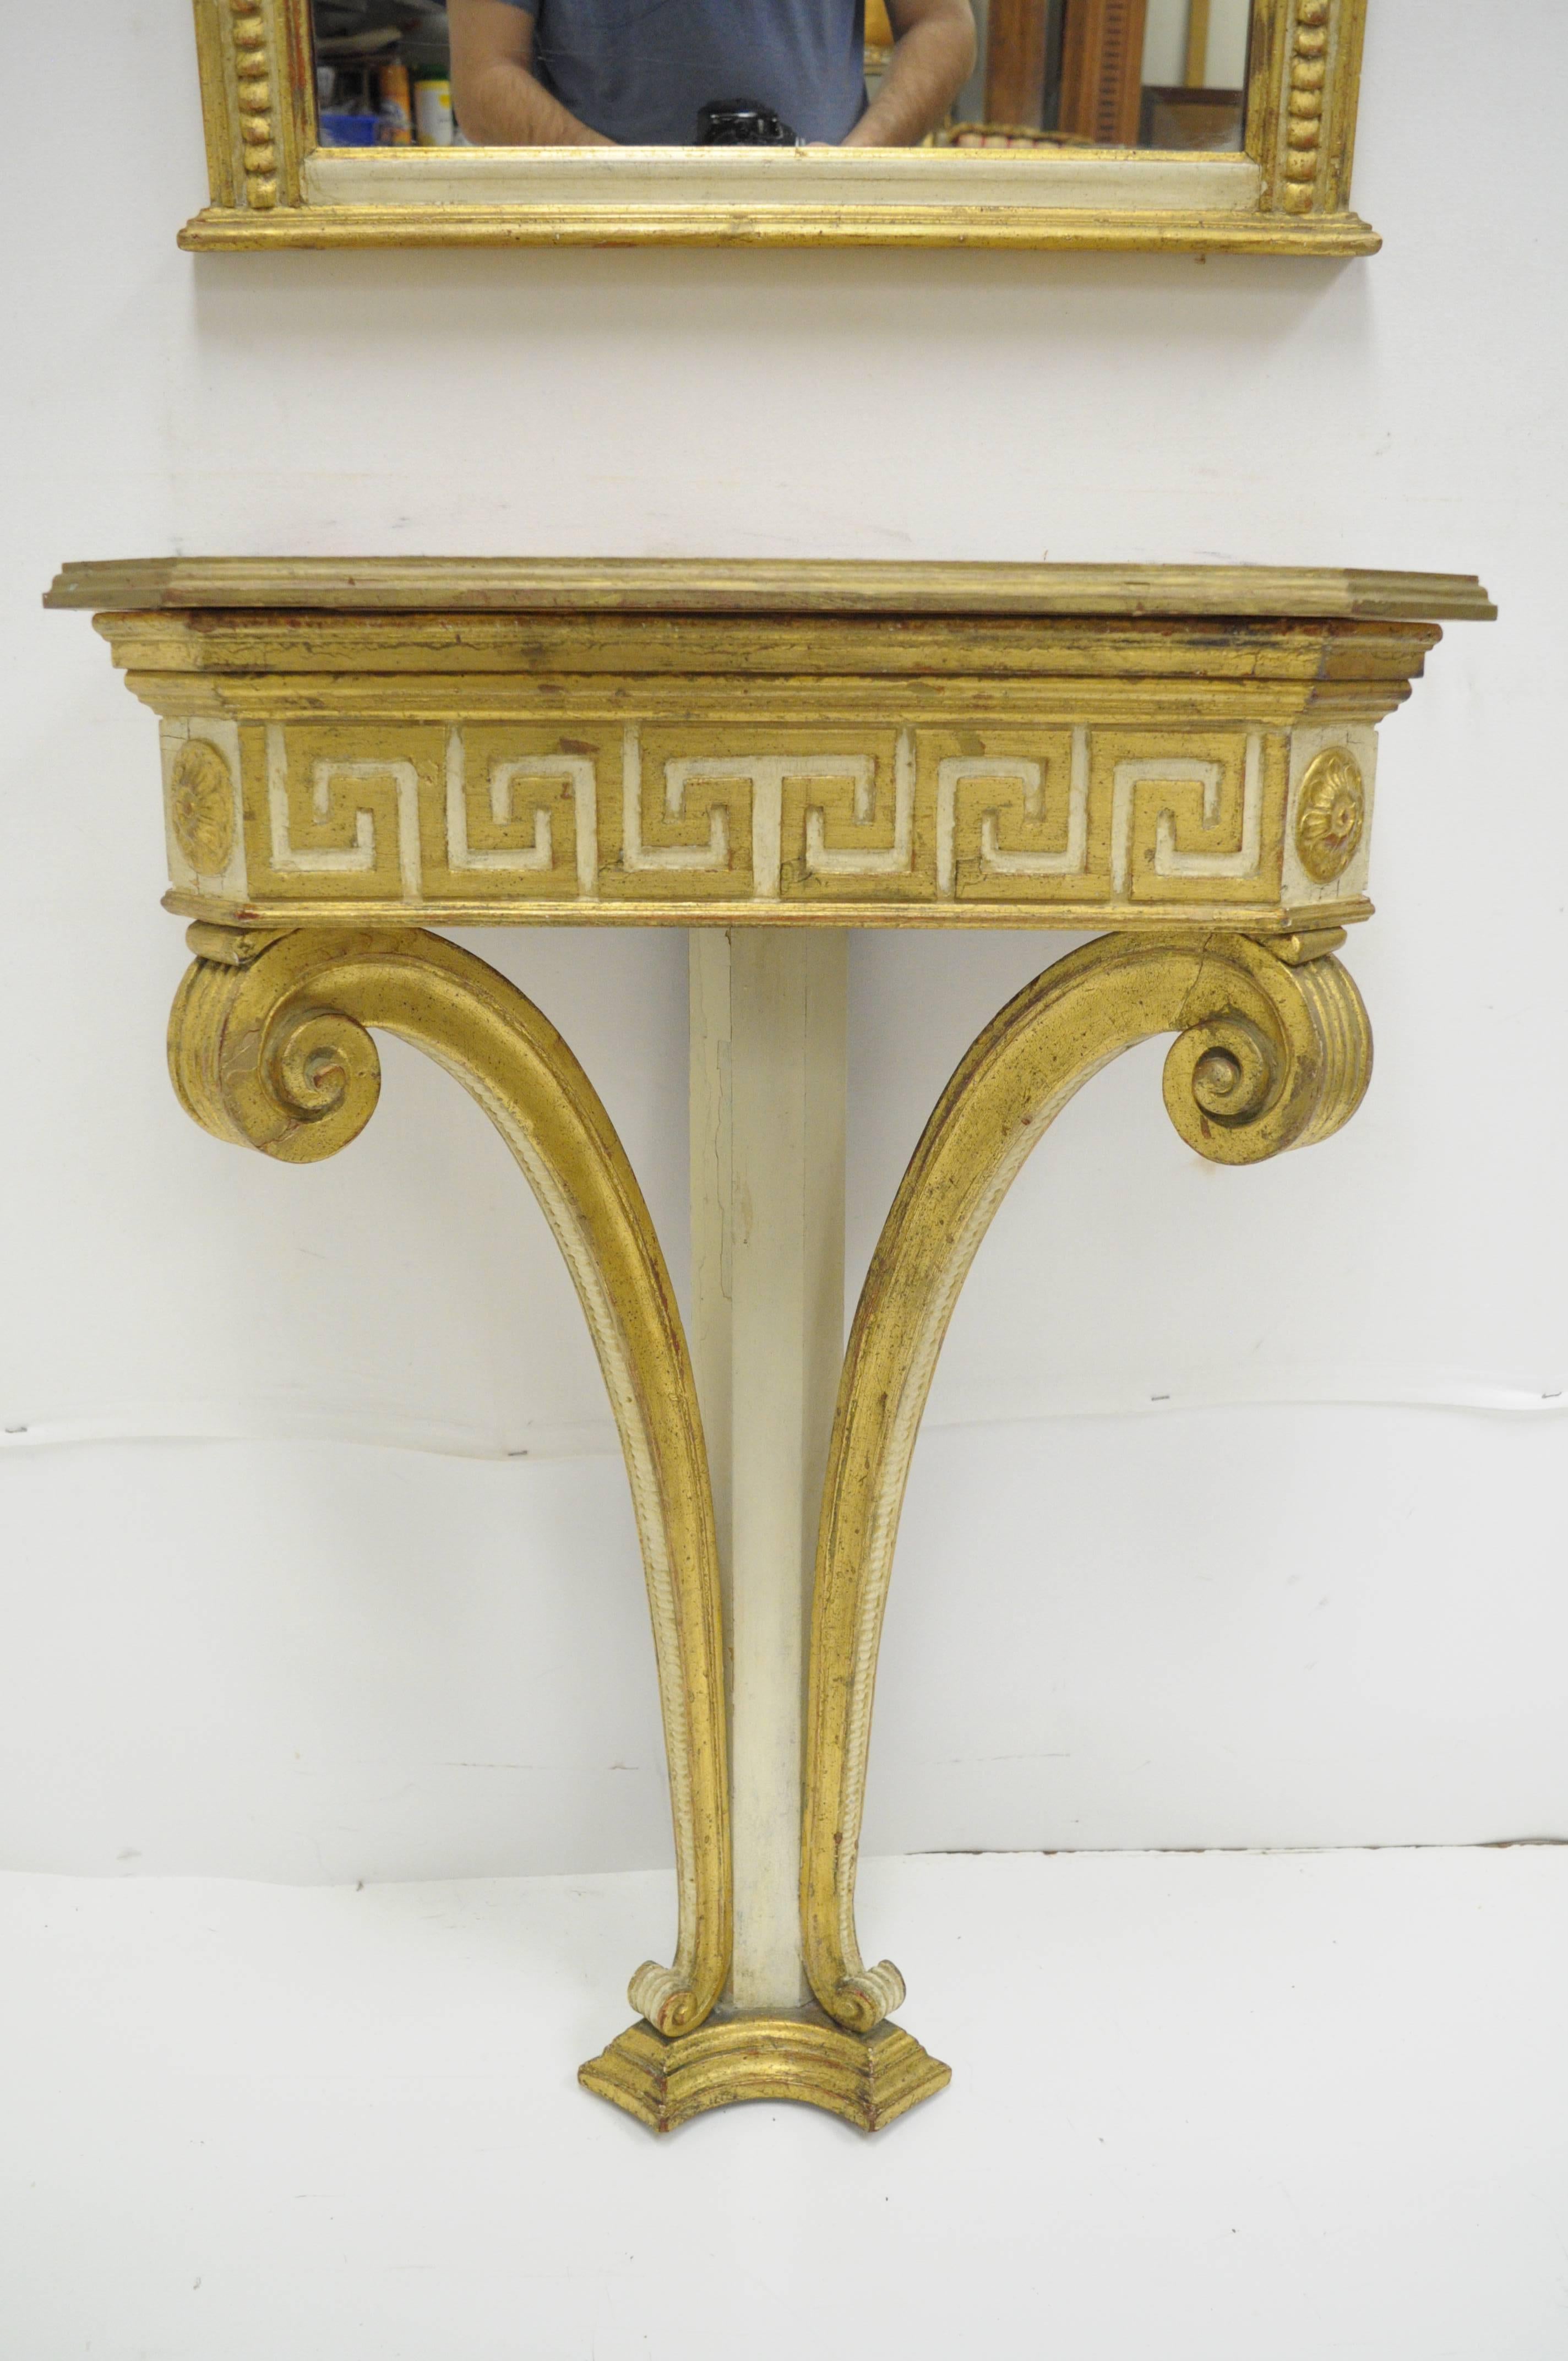 Vintage, early 20th century, Italian neoclassical style gold giltwood Greek key design wall mount small console table and rectangular mirror. Item features a carved wood gold gilt frame mirror with an attractive antiqued cream and gold finish. The